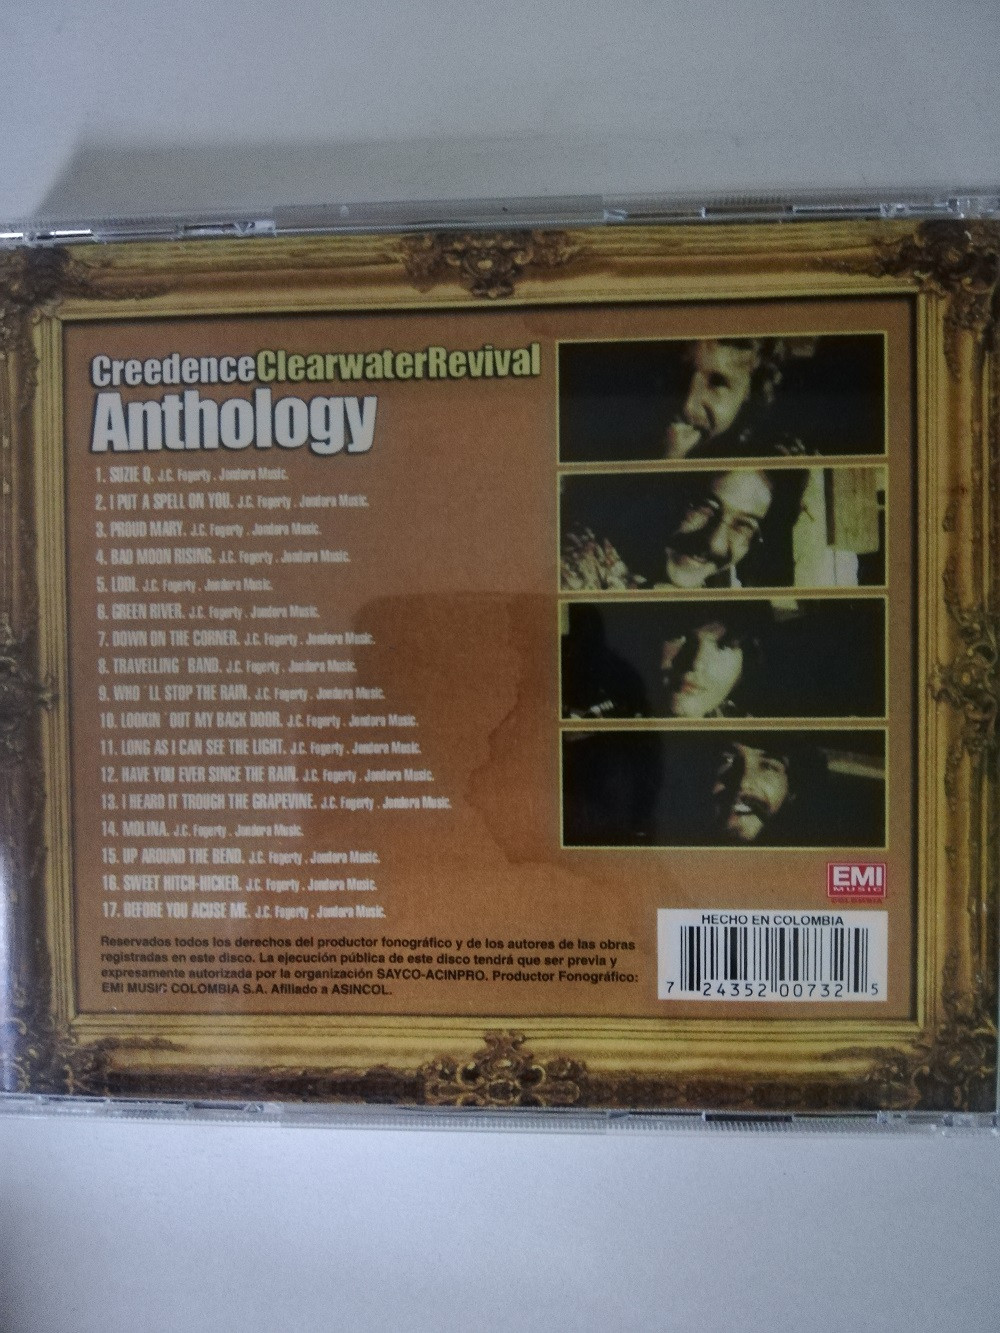 Imagen CD CREEDENCE CLEARWATER REVIVAL - ANTHOLOGY 2